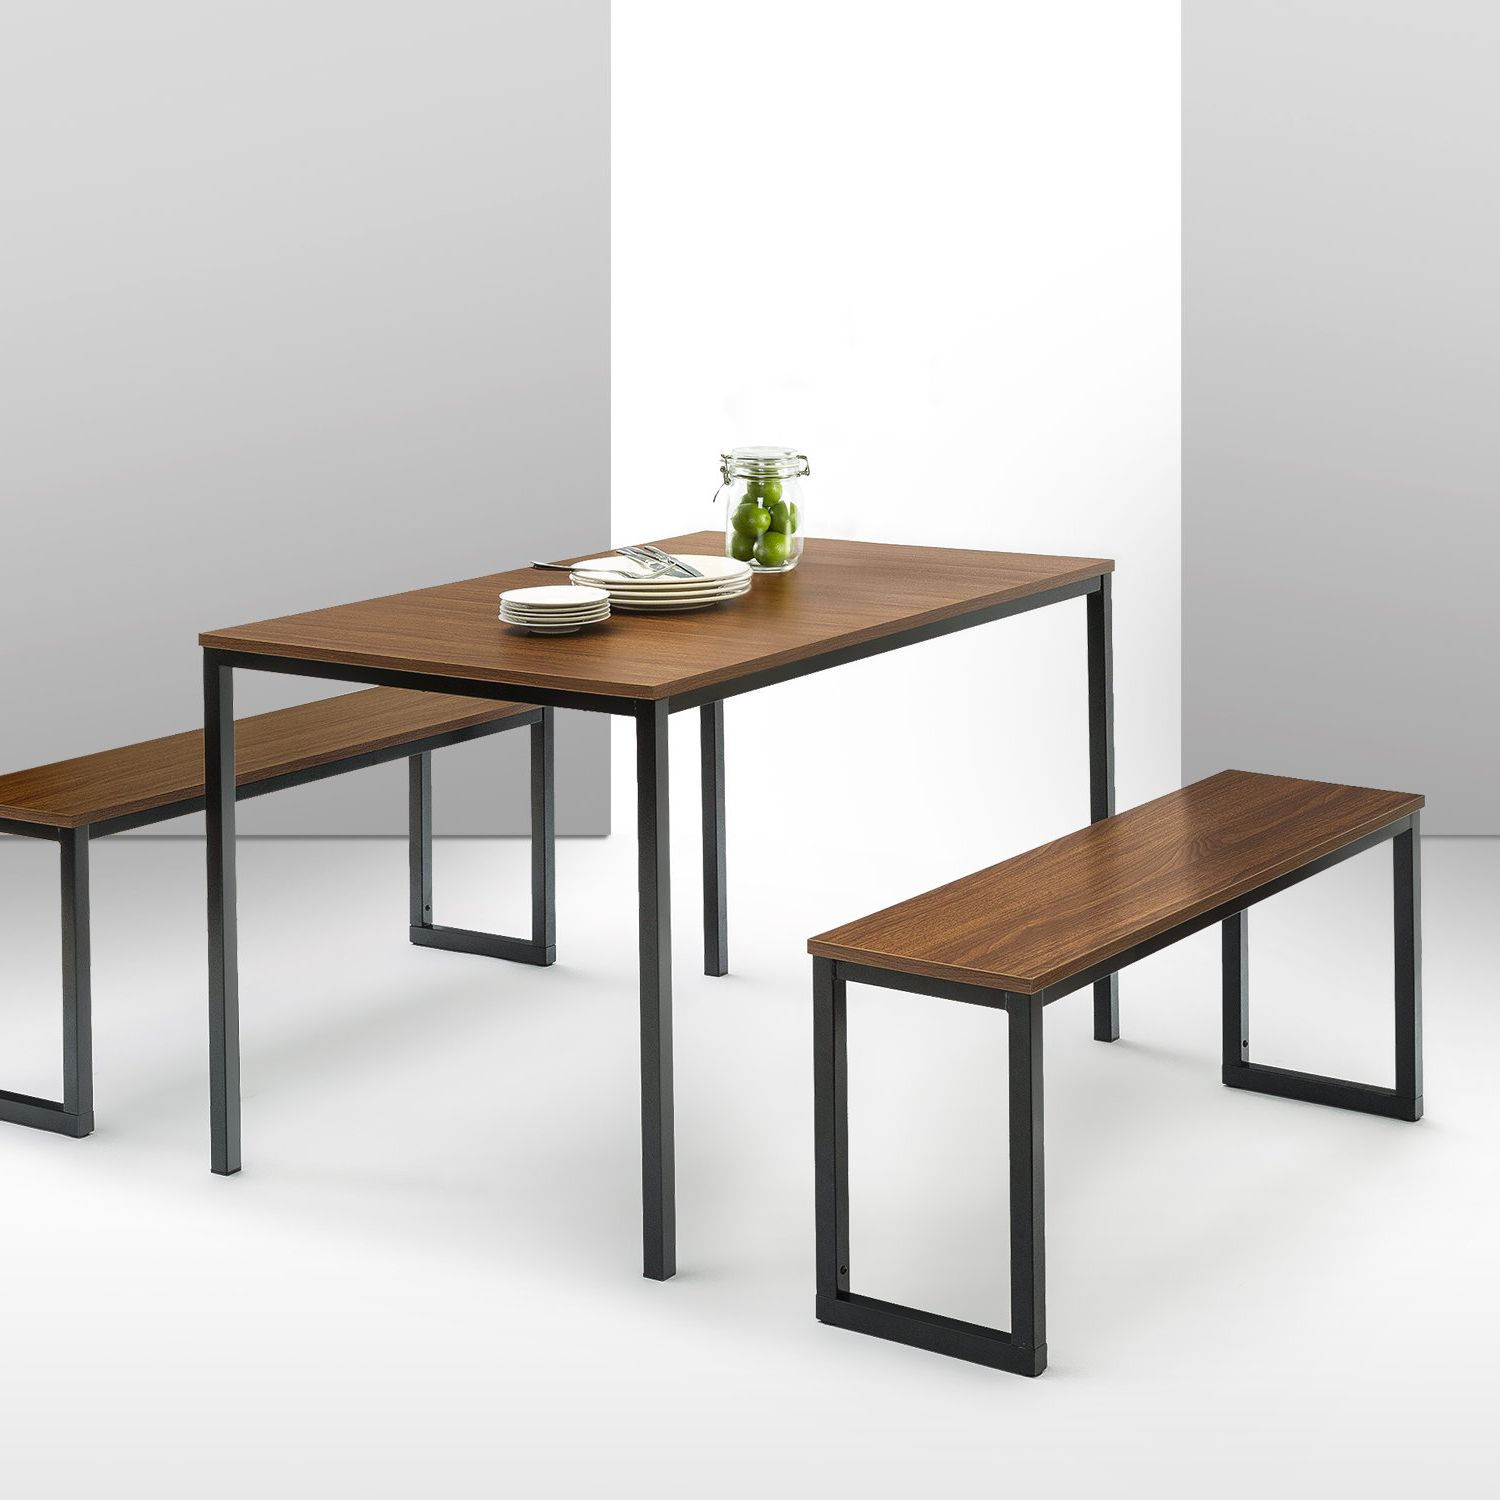 Frida 3 Piece Dining Table Set Within Current 3 Piece Dining Sets (View 8 of 20)